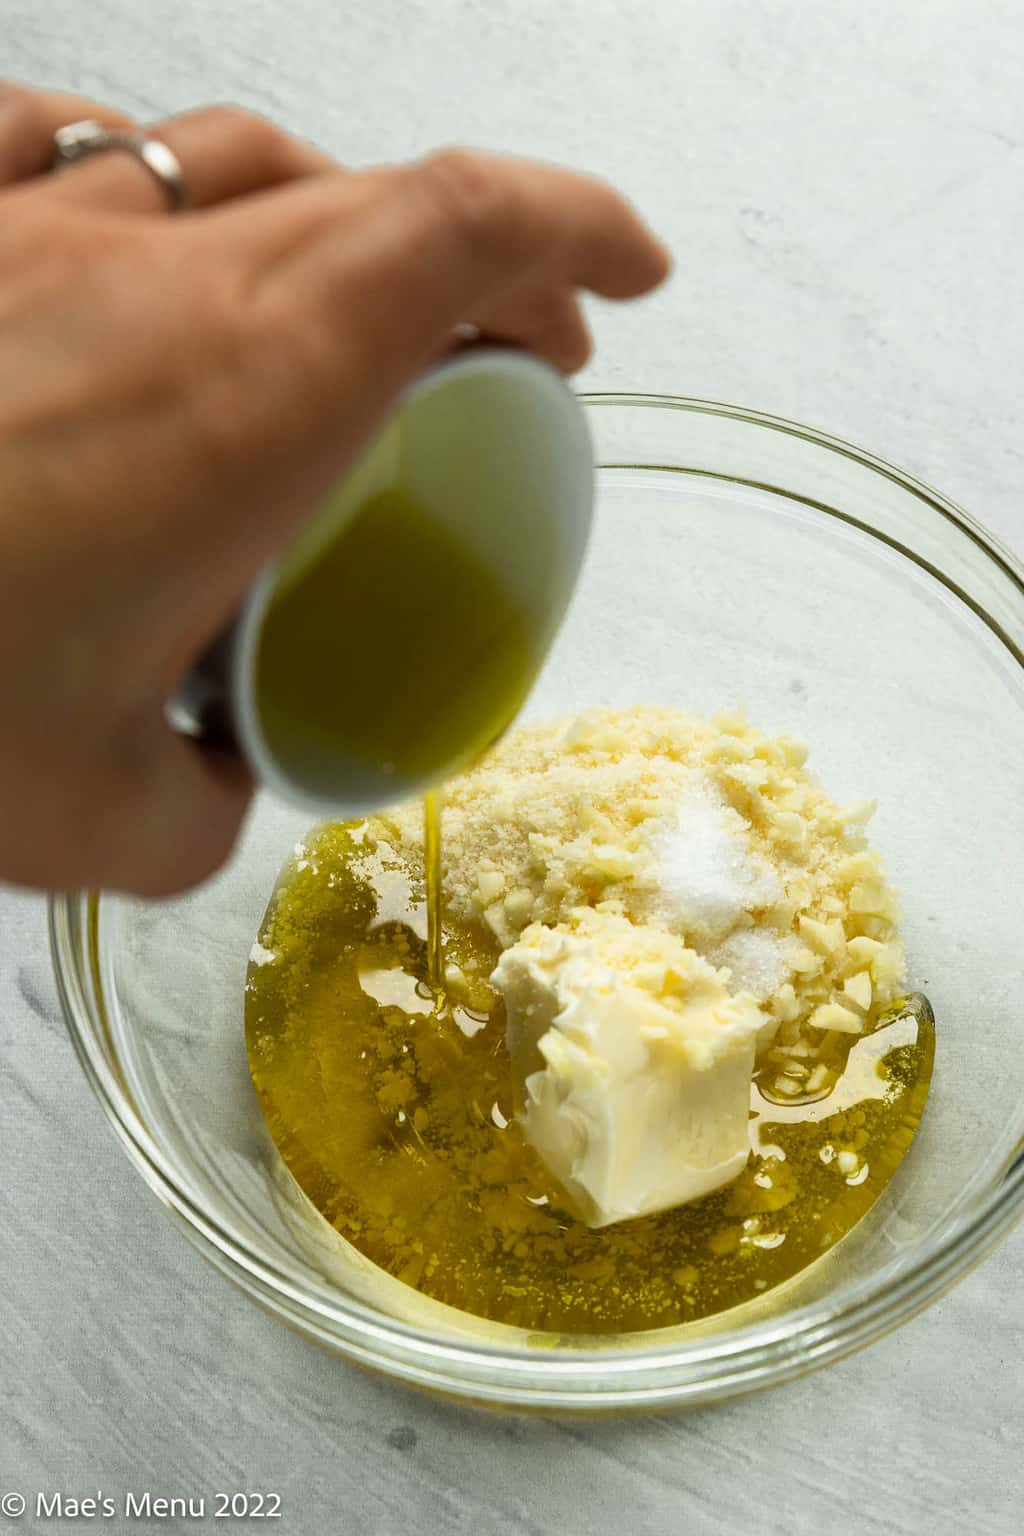 Pouring olive oil into a small boil of butter, cheese, and garlic.